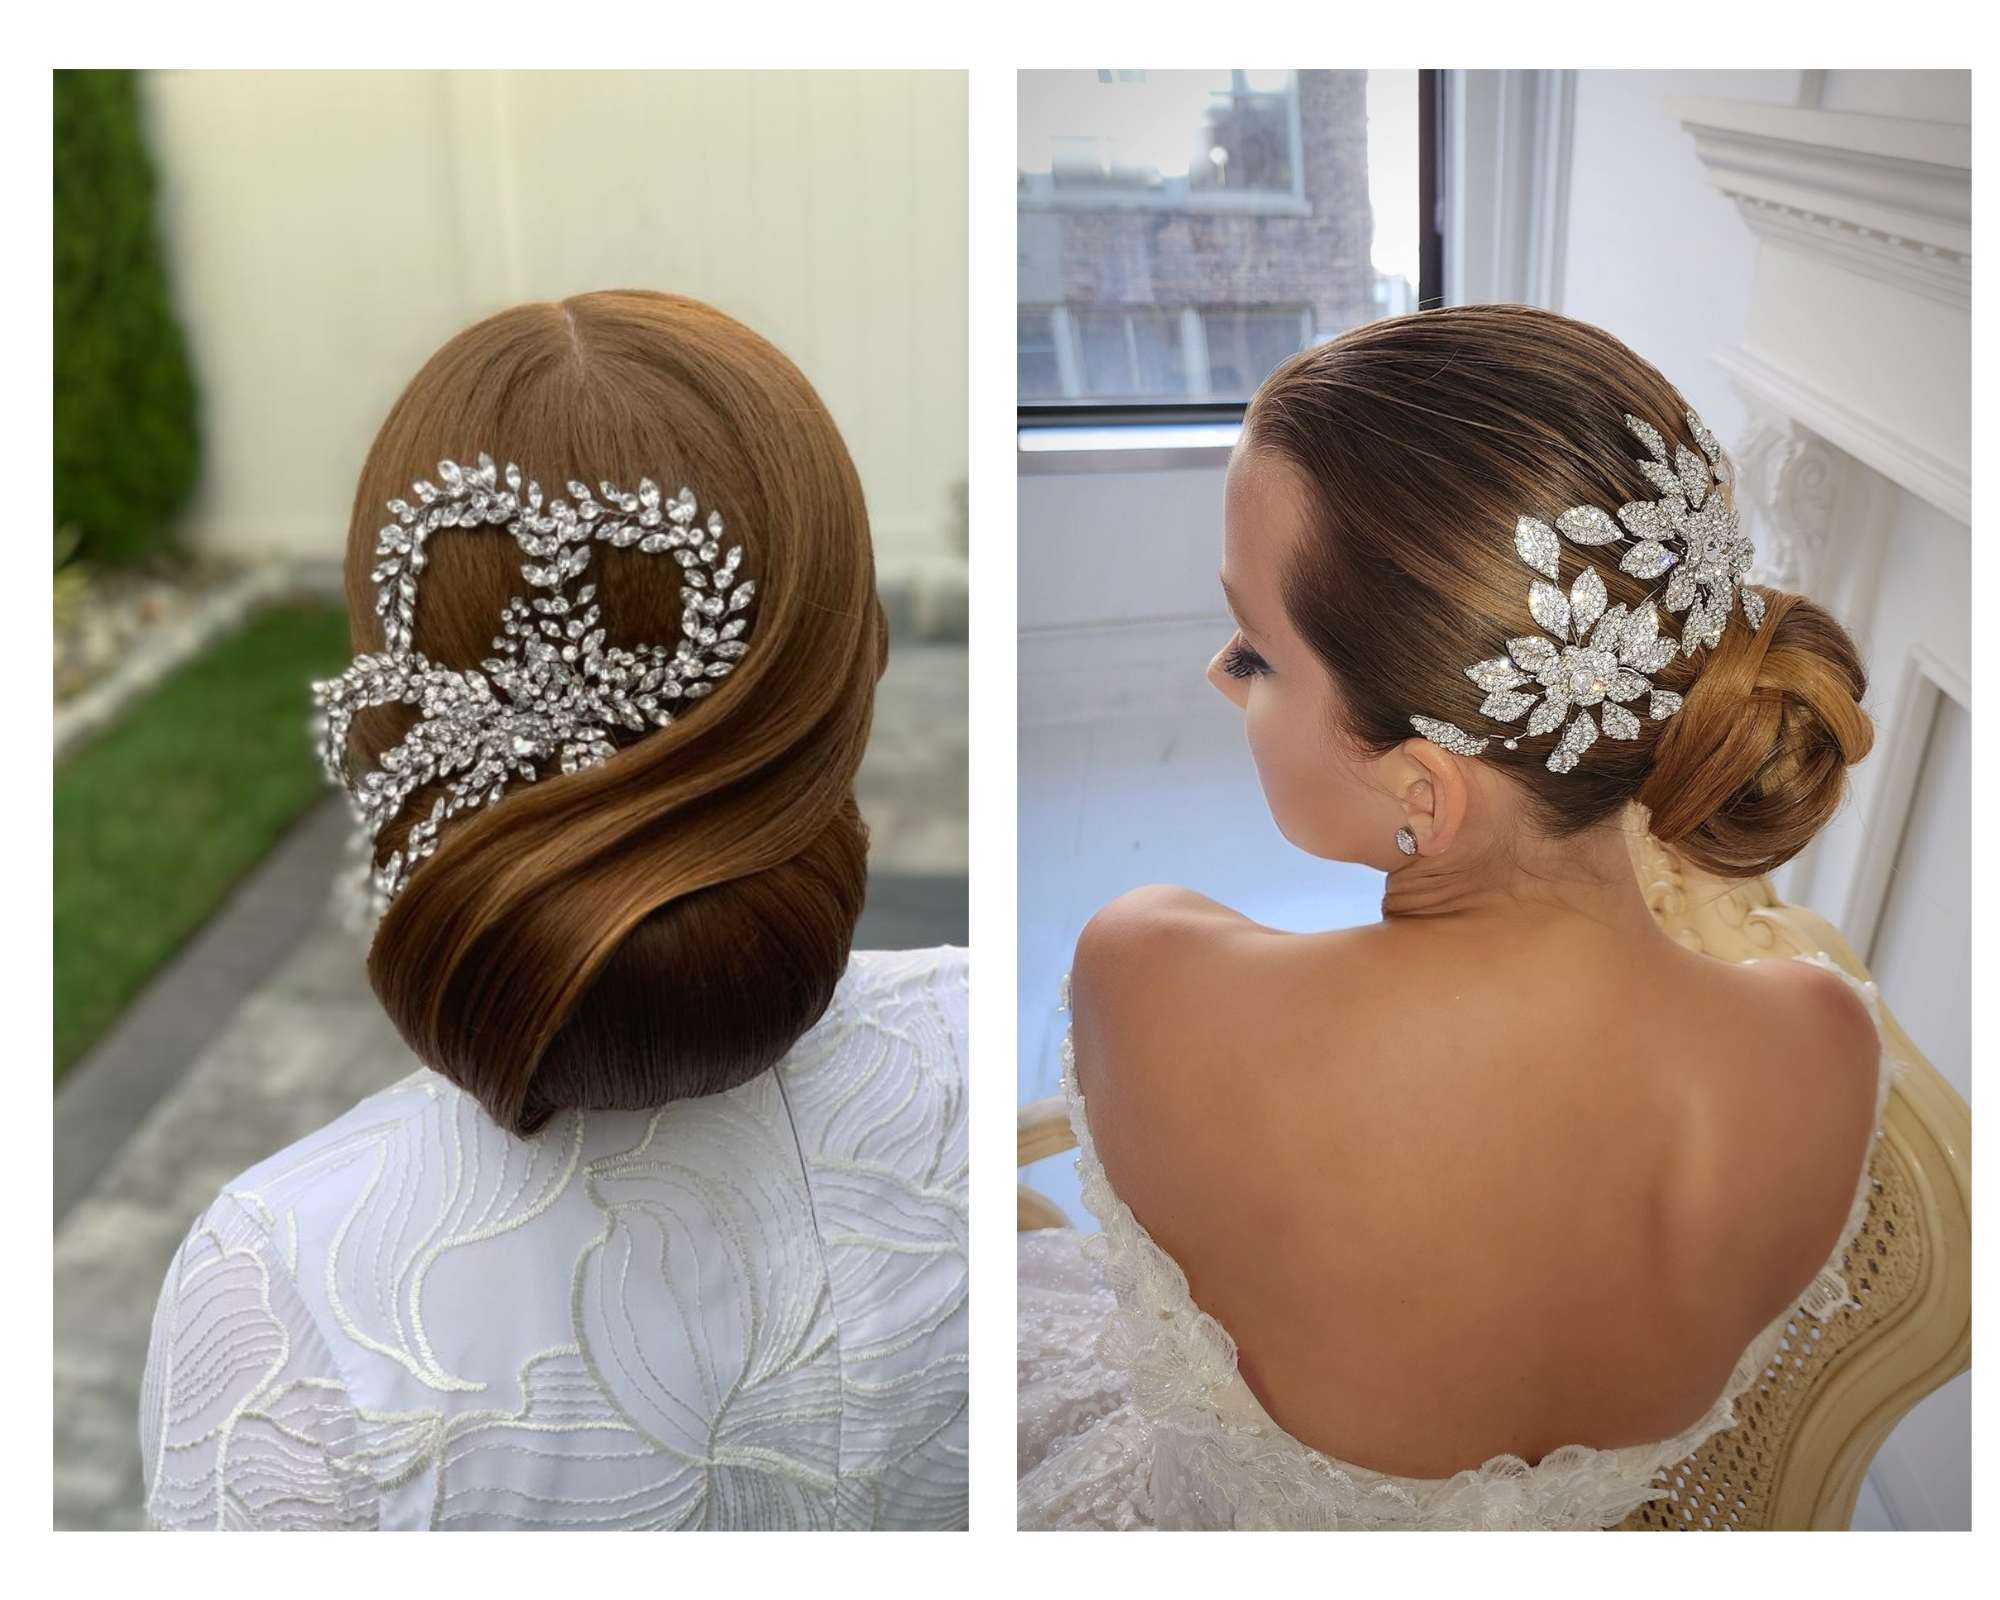 Low bridal buns styled with sparkling crystal hair vines that accent the back of the hairstyle.